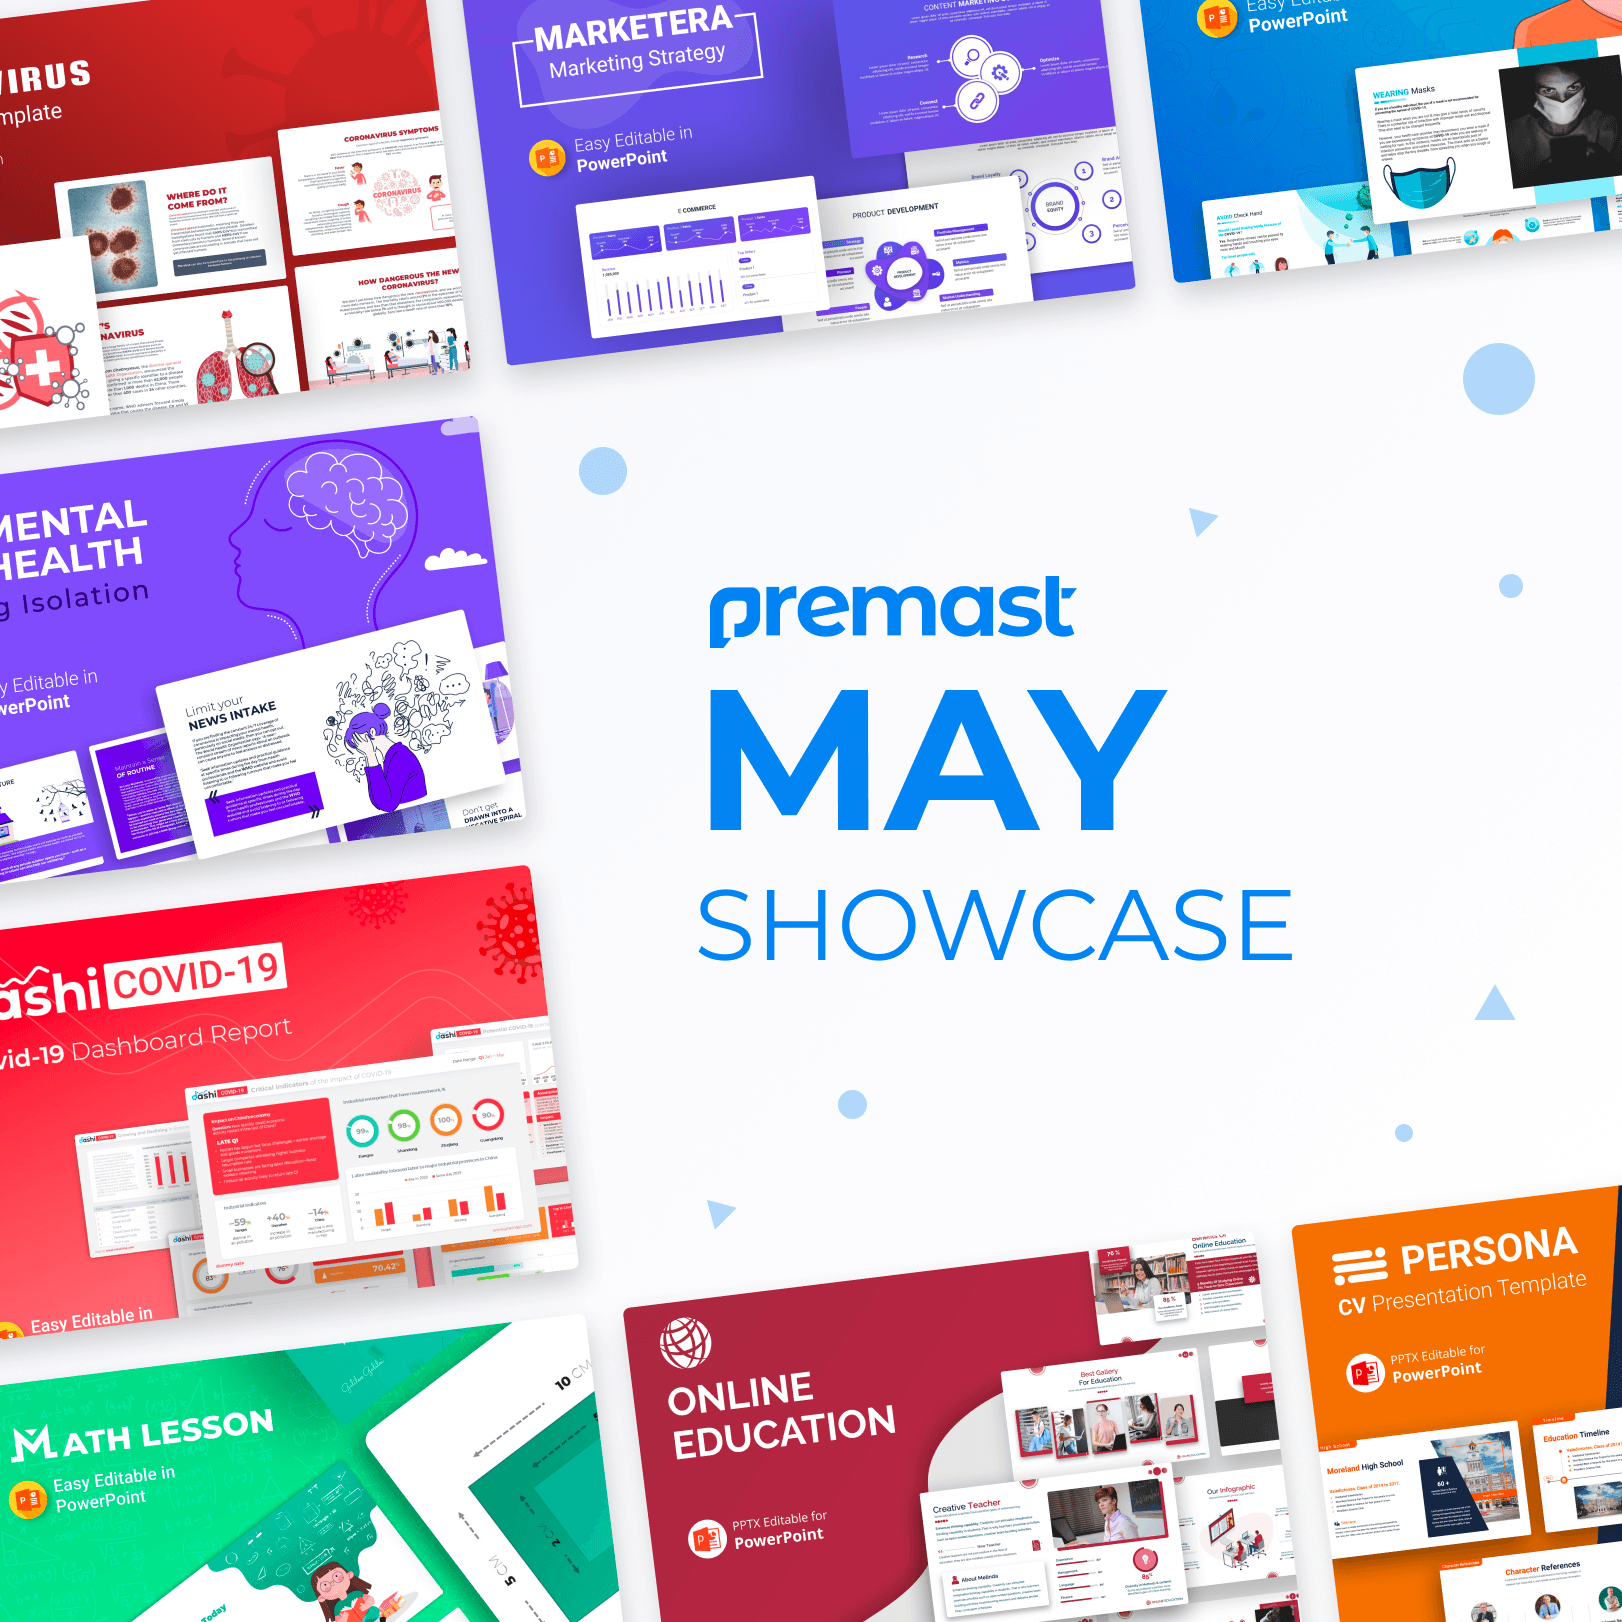 May Showcase: Recently Added, Top Presentation and More